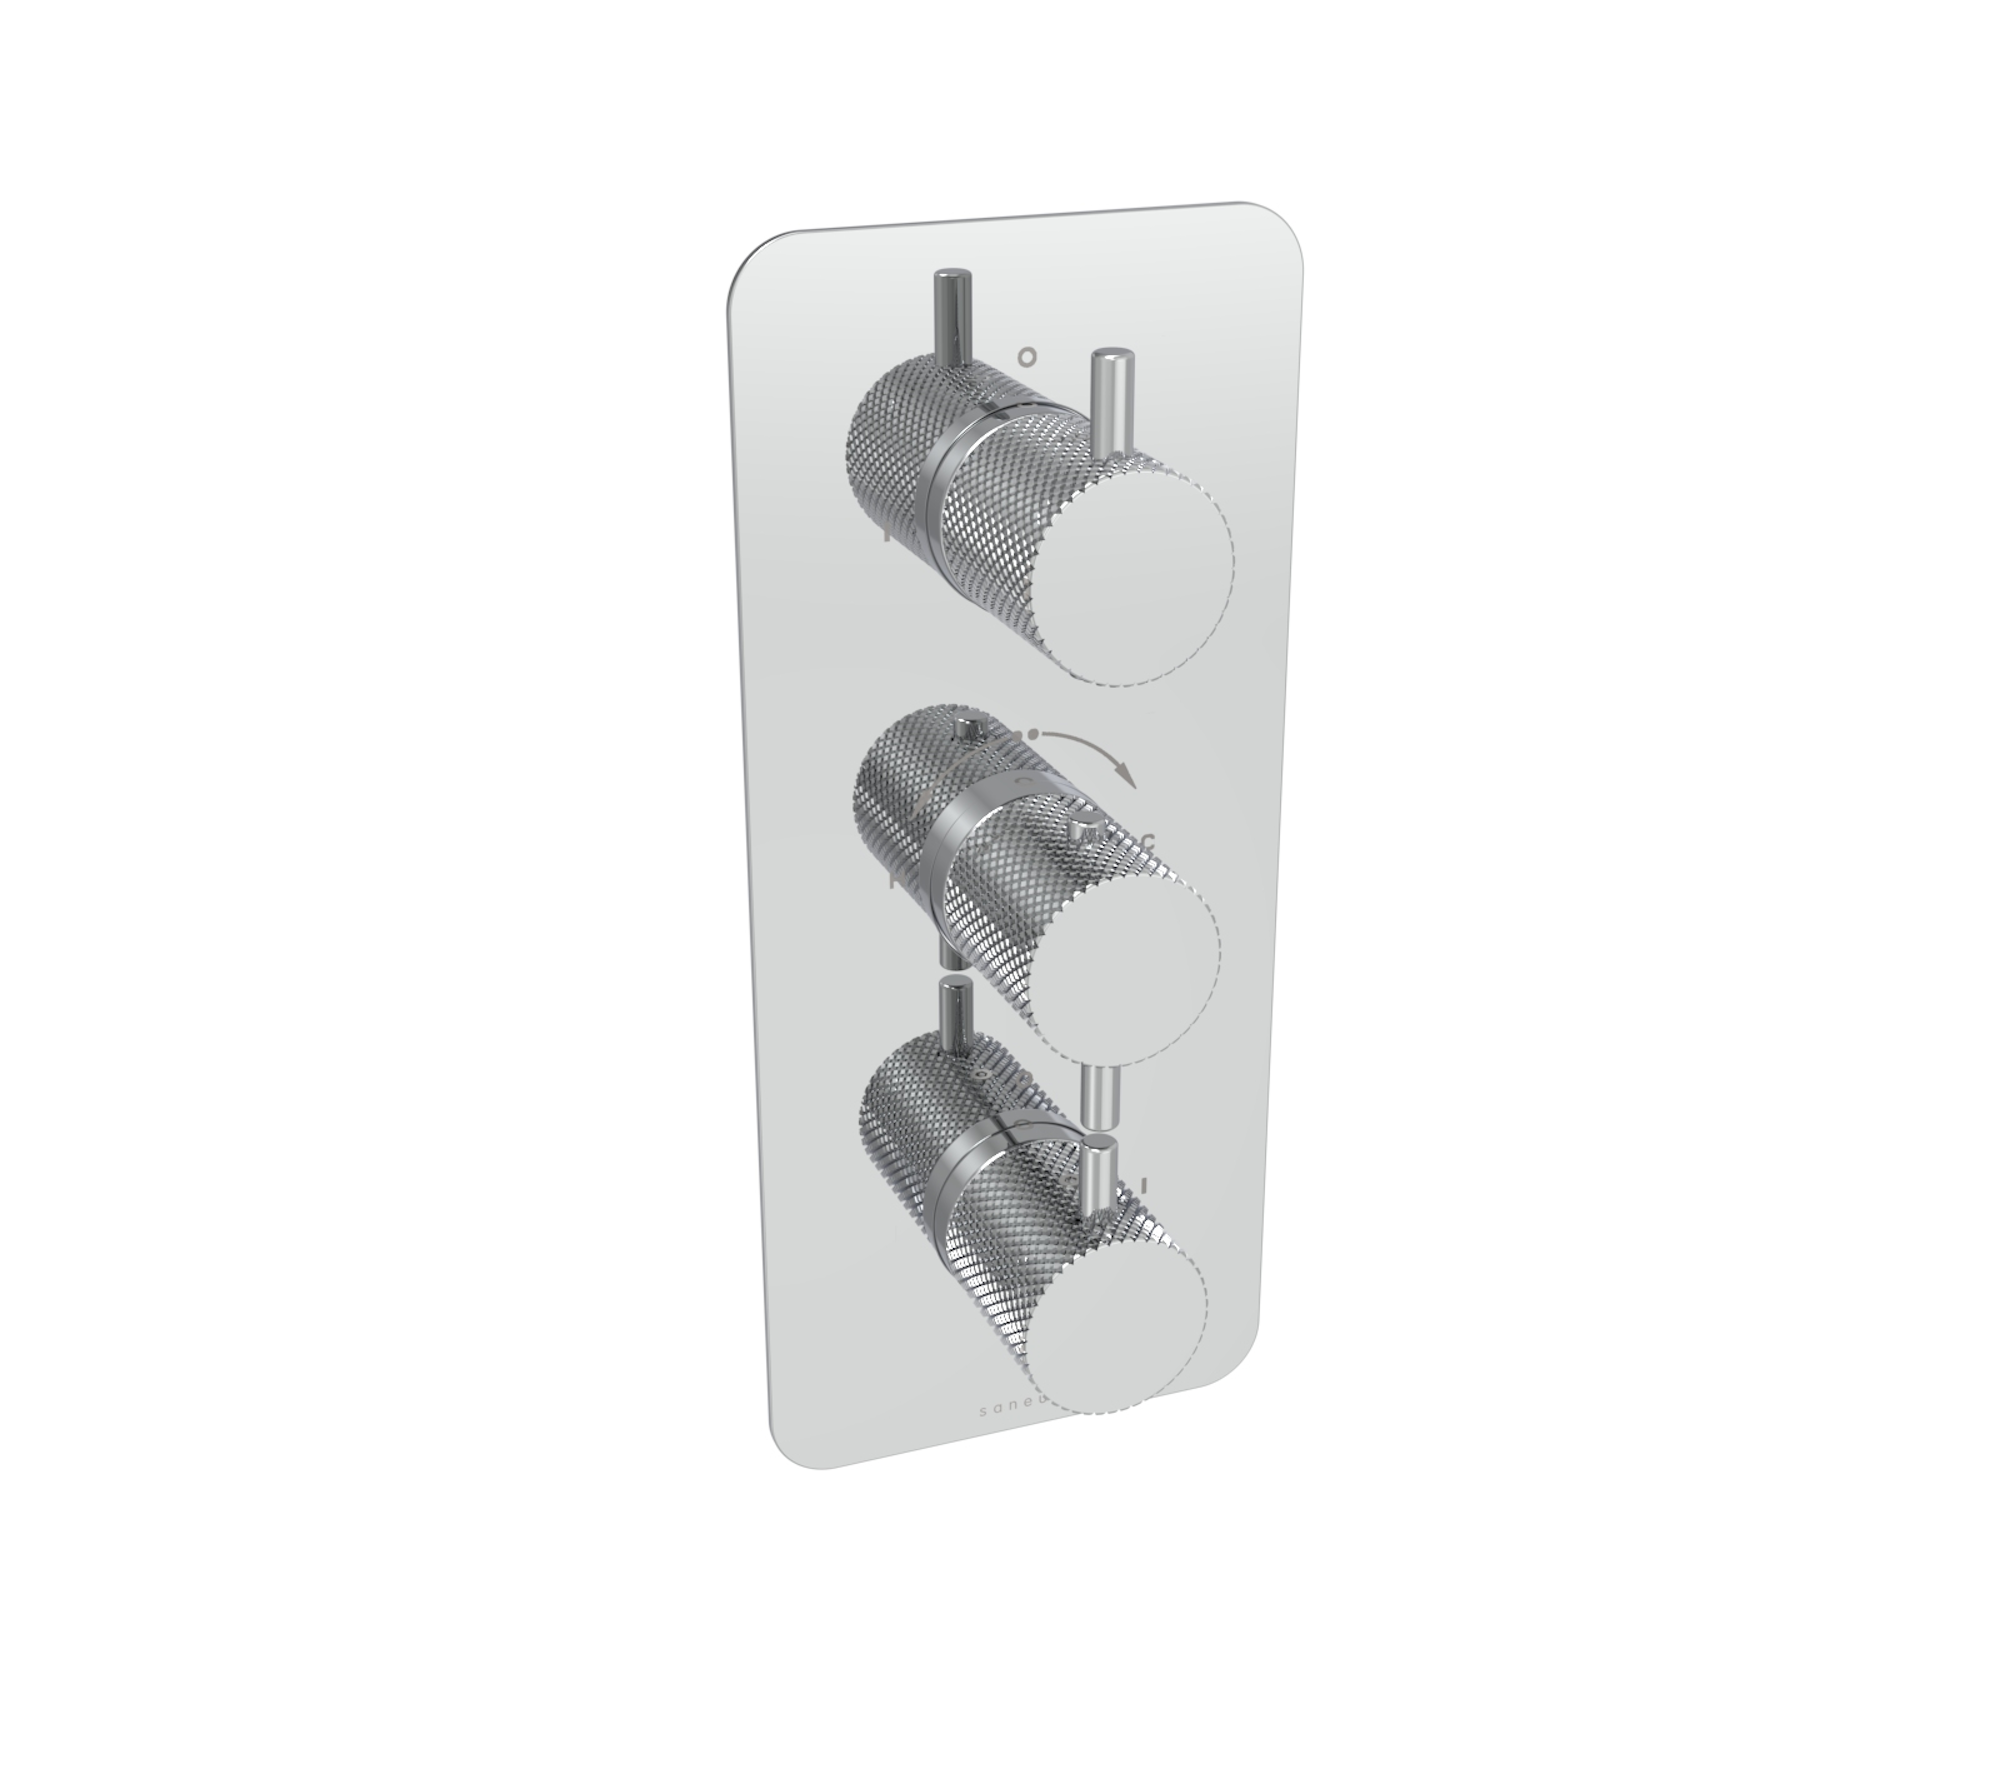 COS 3 way thermostatic shower valve kit with knurled handles - Chrome